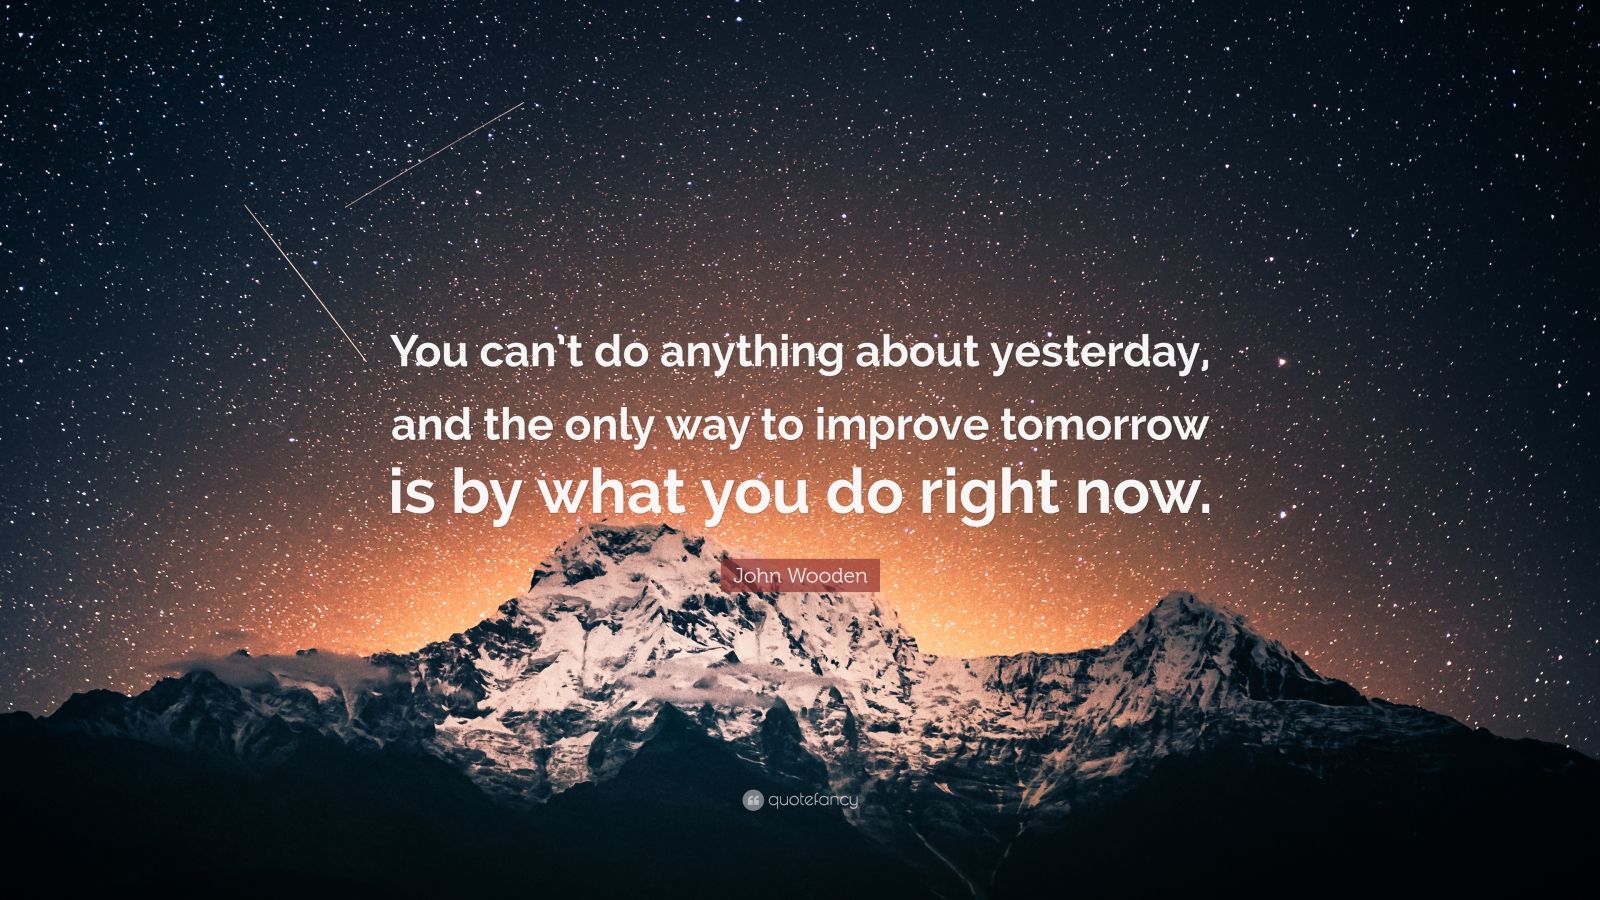 John Wooden Quote: “You can’t do anything about yesterday, and the only ...